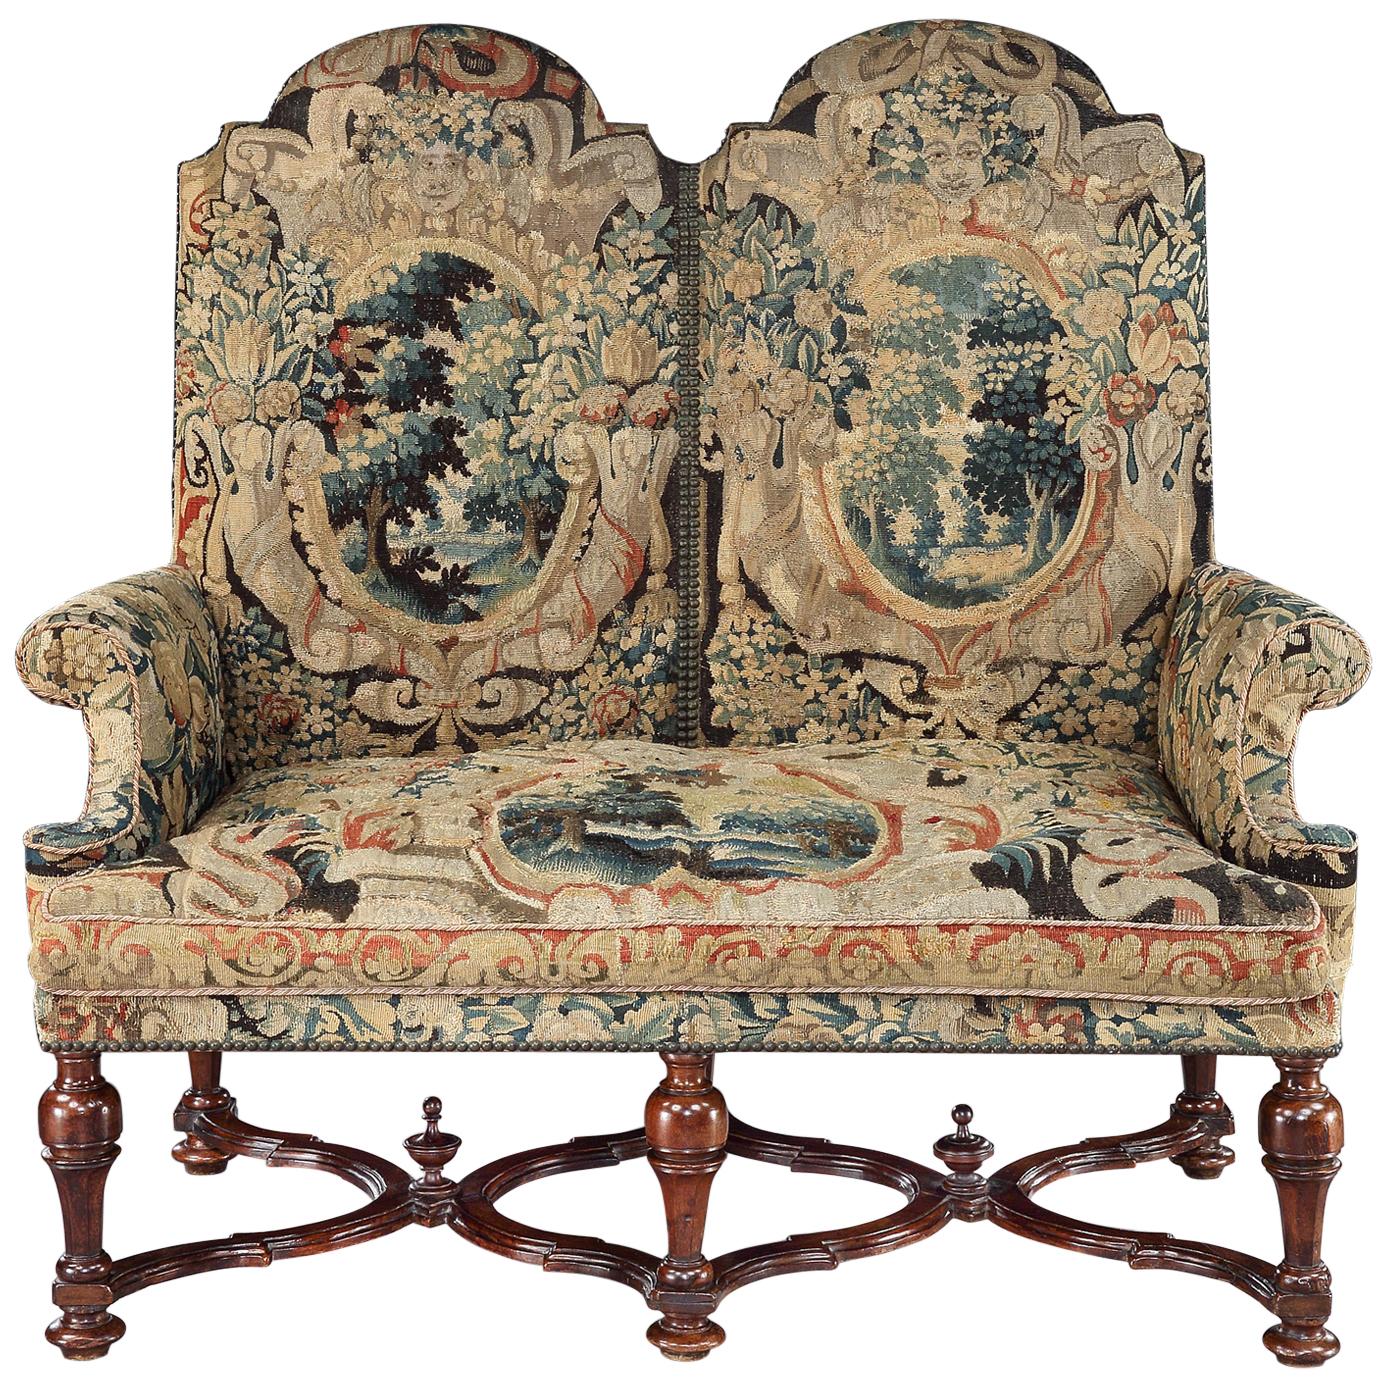 Settee, Sofa, Double-Chair Back, Brussels Tapestry, X-Stretcher, Walnut, 1700